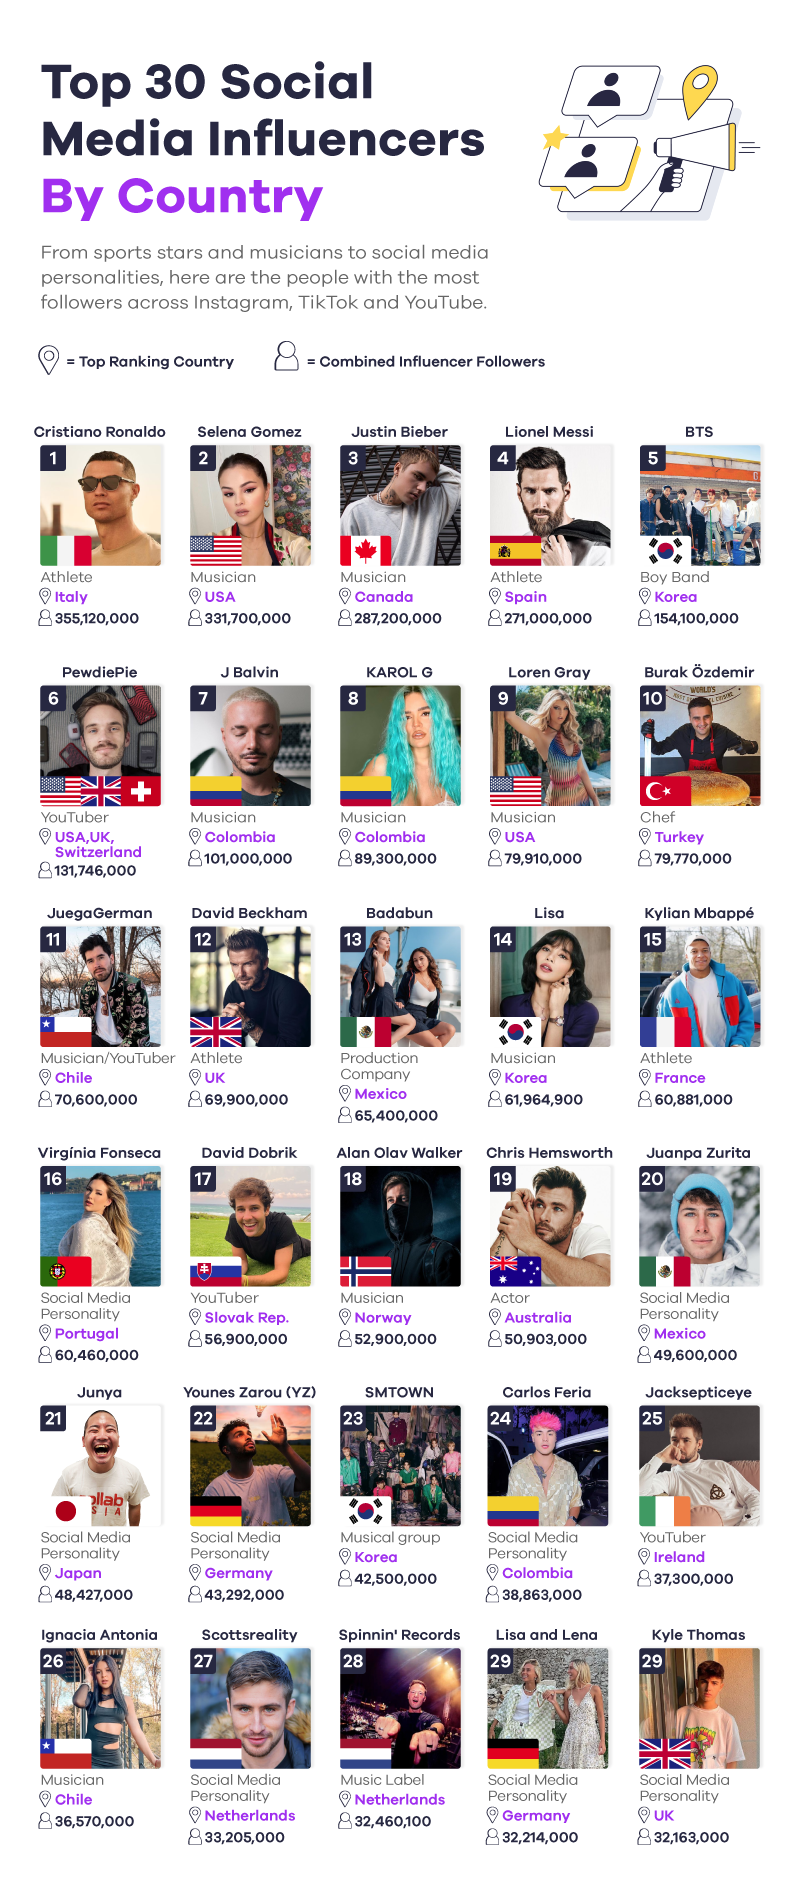 Top 30 Social Media Influencers By Country